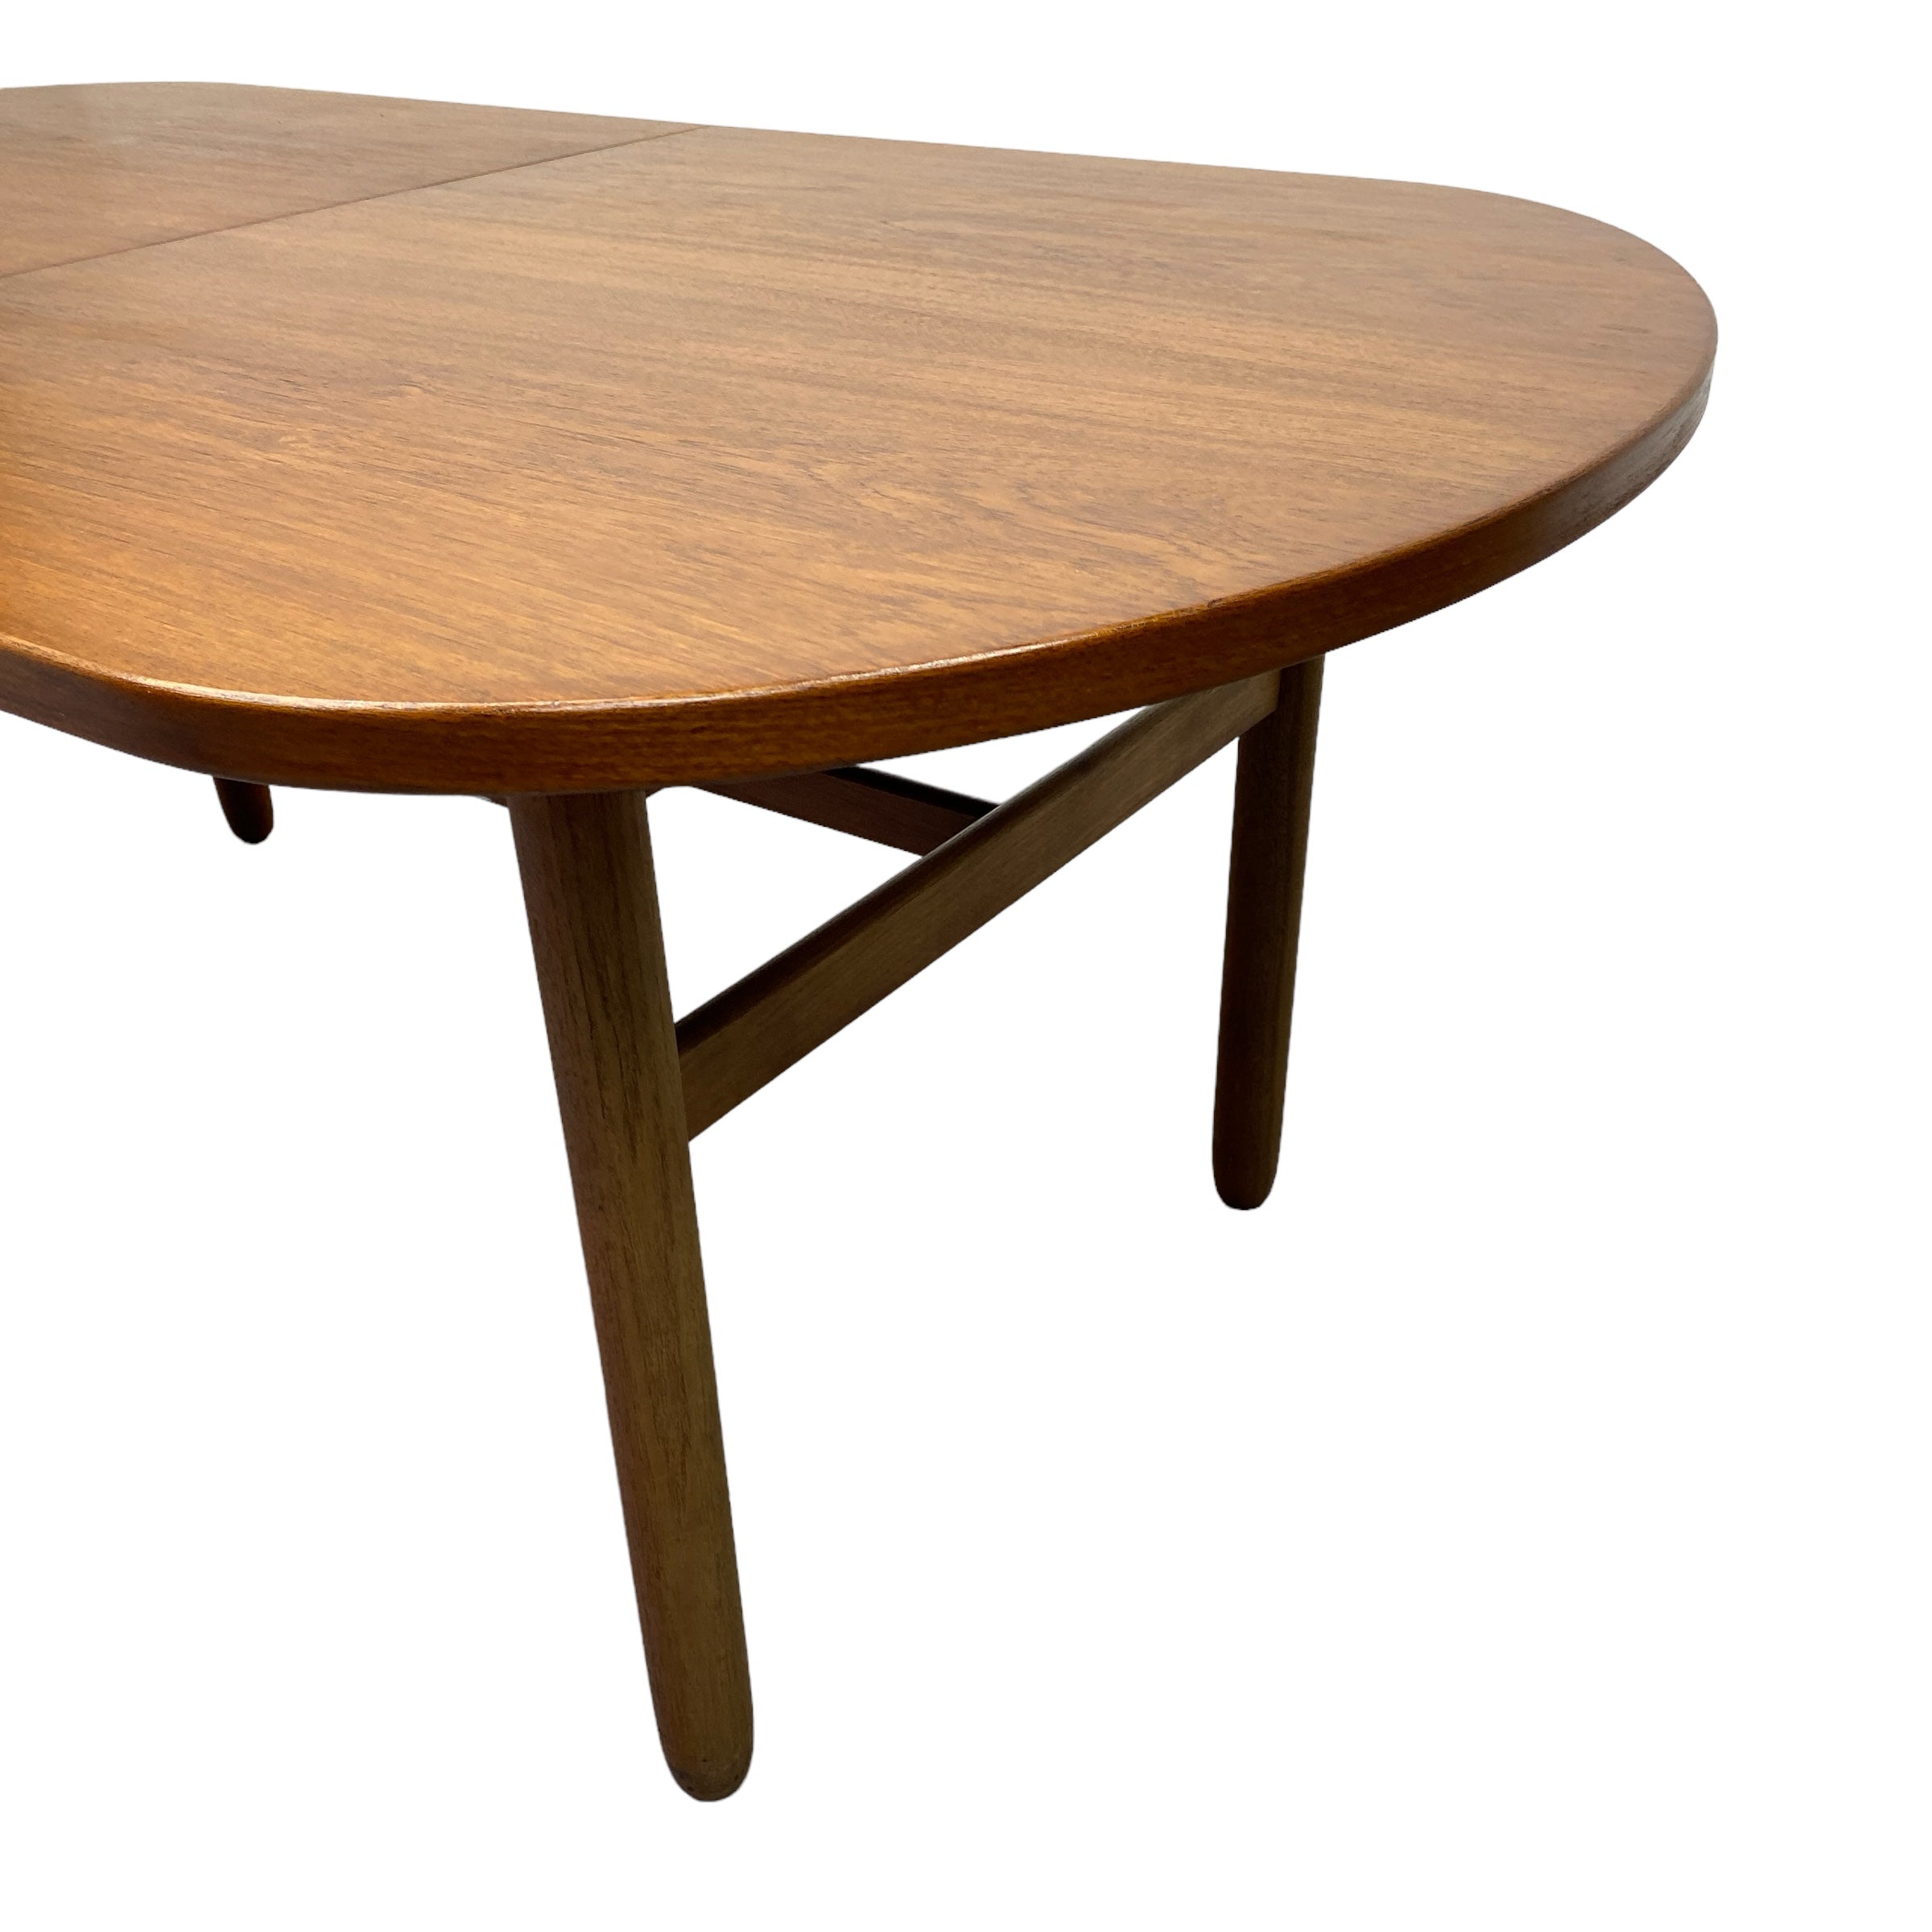 Oval Danish Dining Table Midcentury Extendable Oval